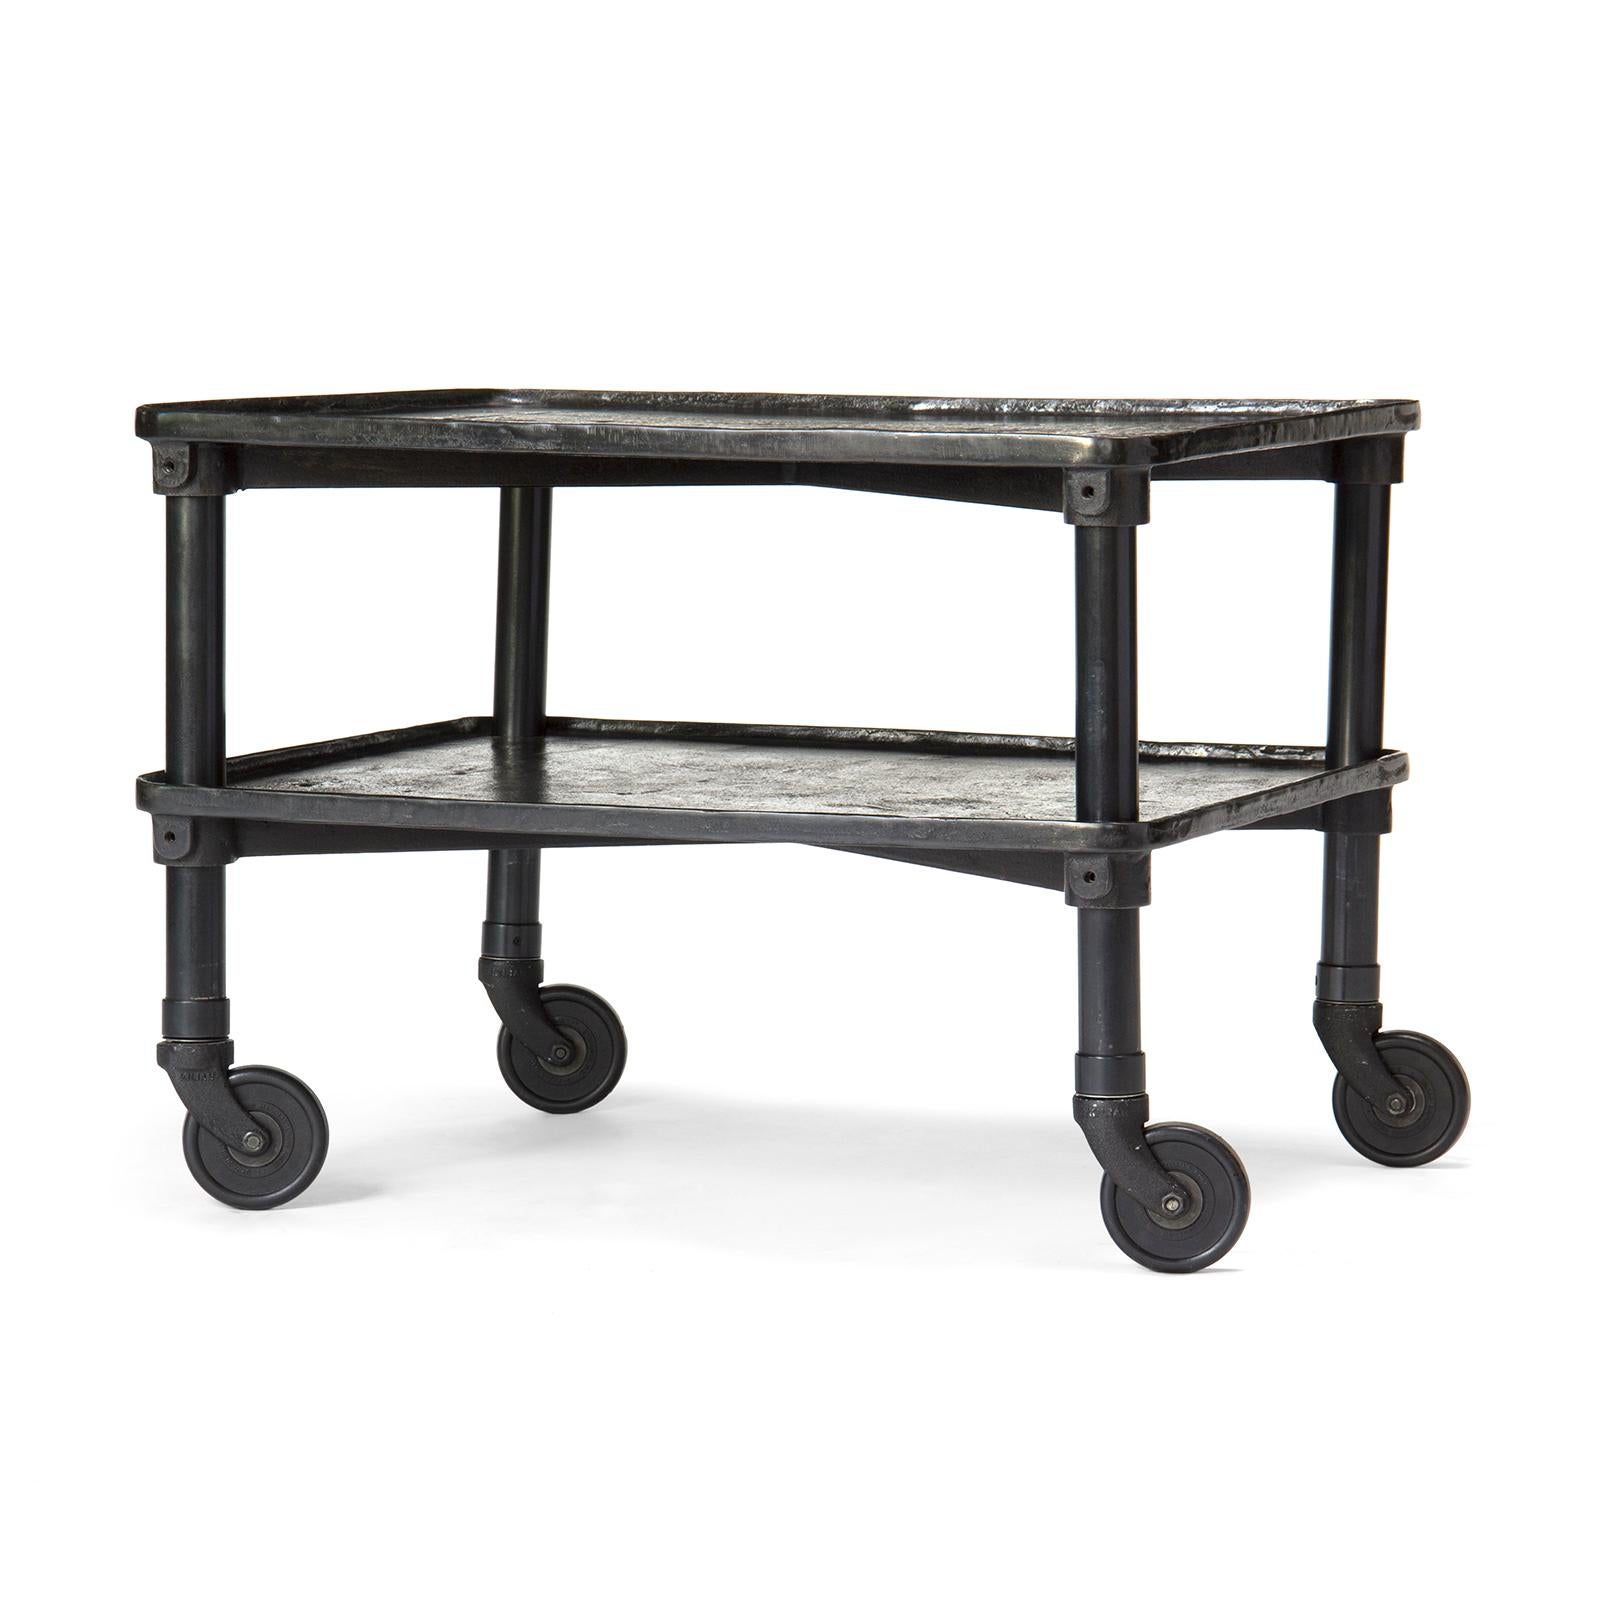 A patinated cast iron two-tier industrial table on single wheel casters.